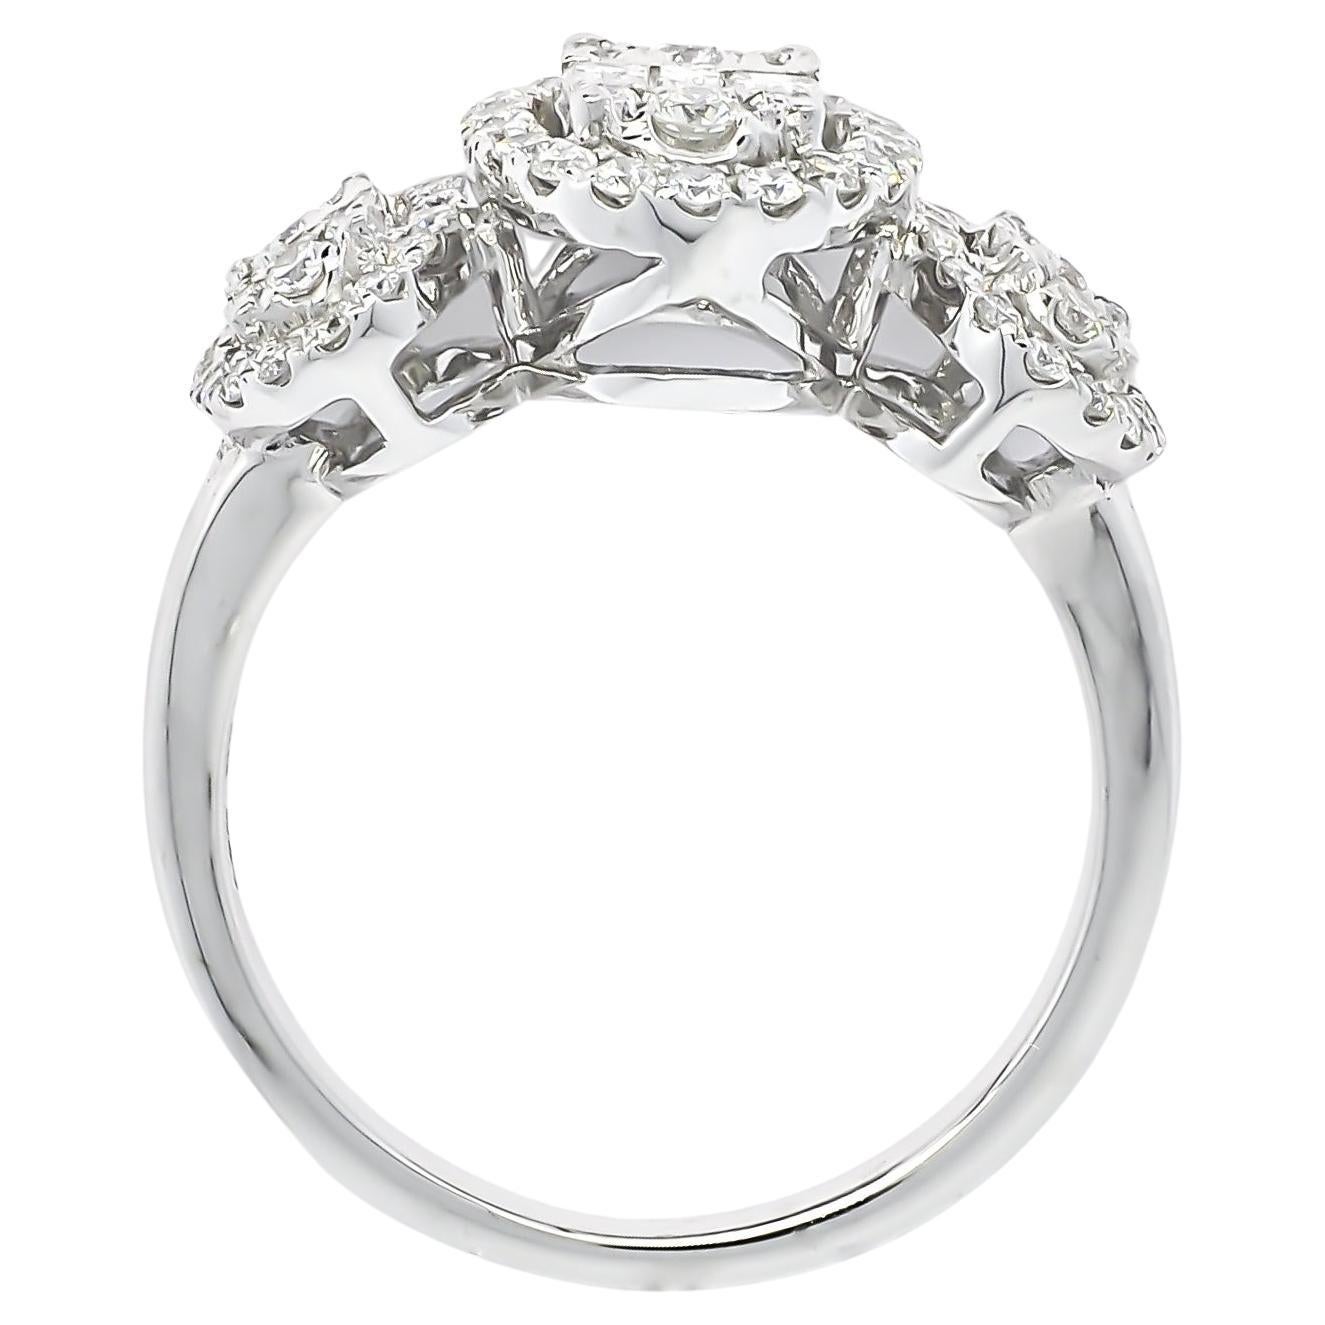 For Sale:  18KT White Gold 3 Cluster Diamond Engagement Ring R61146, Statement Diamond Ring 2